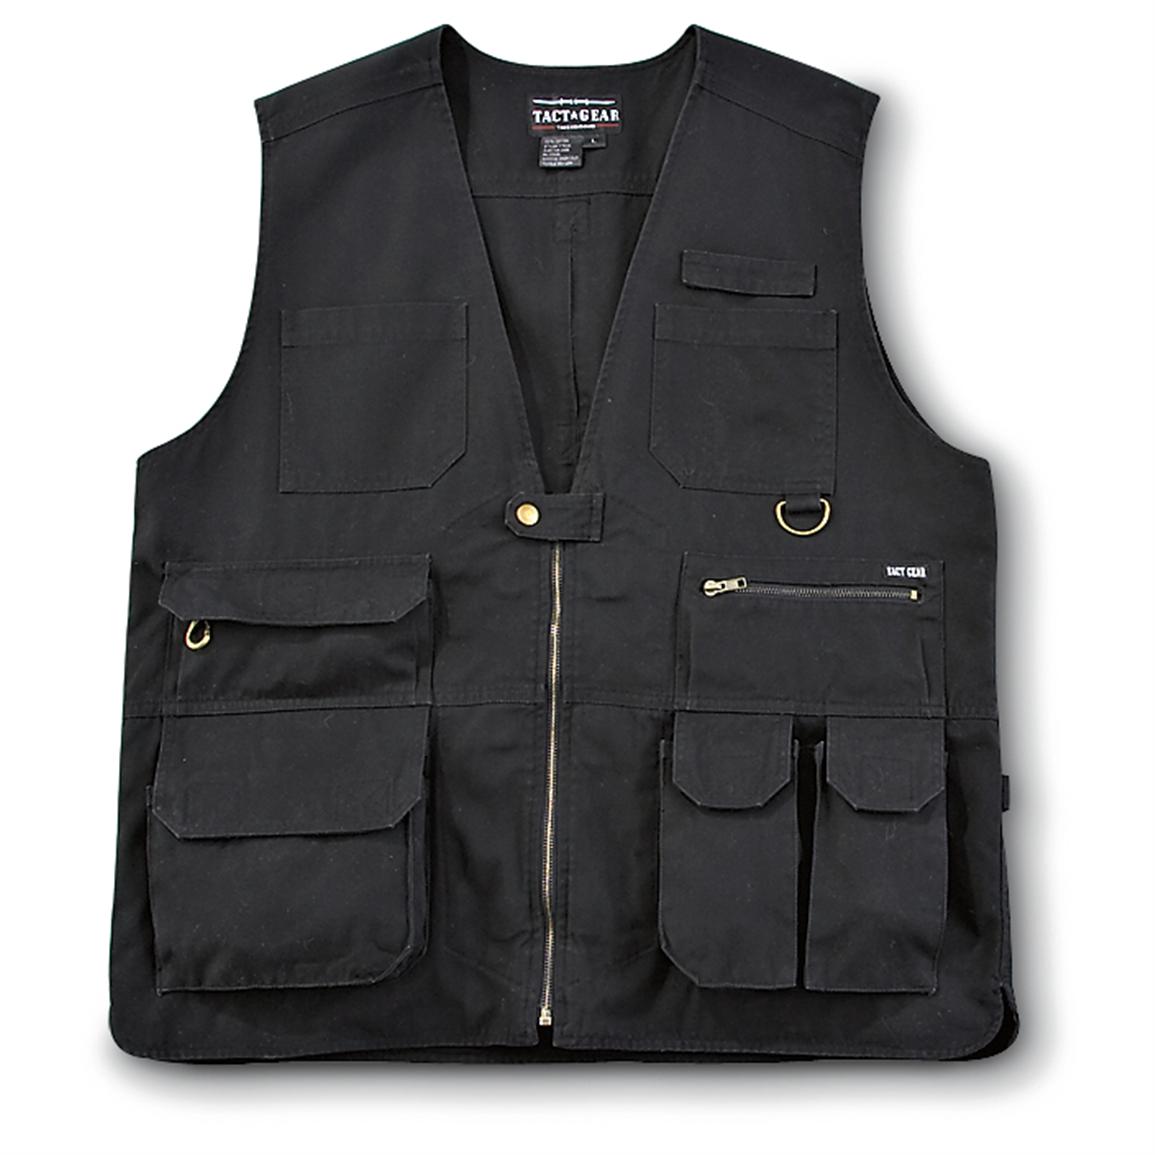 Tact Gear Men's Tactical Vest - 144646, Holsters at Sportsman's Guide